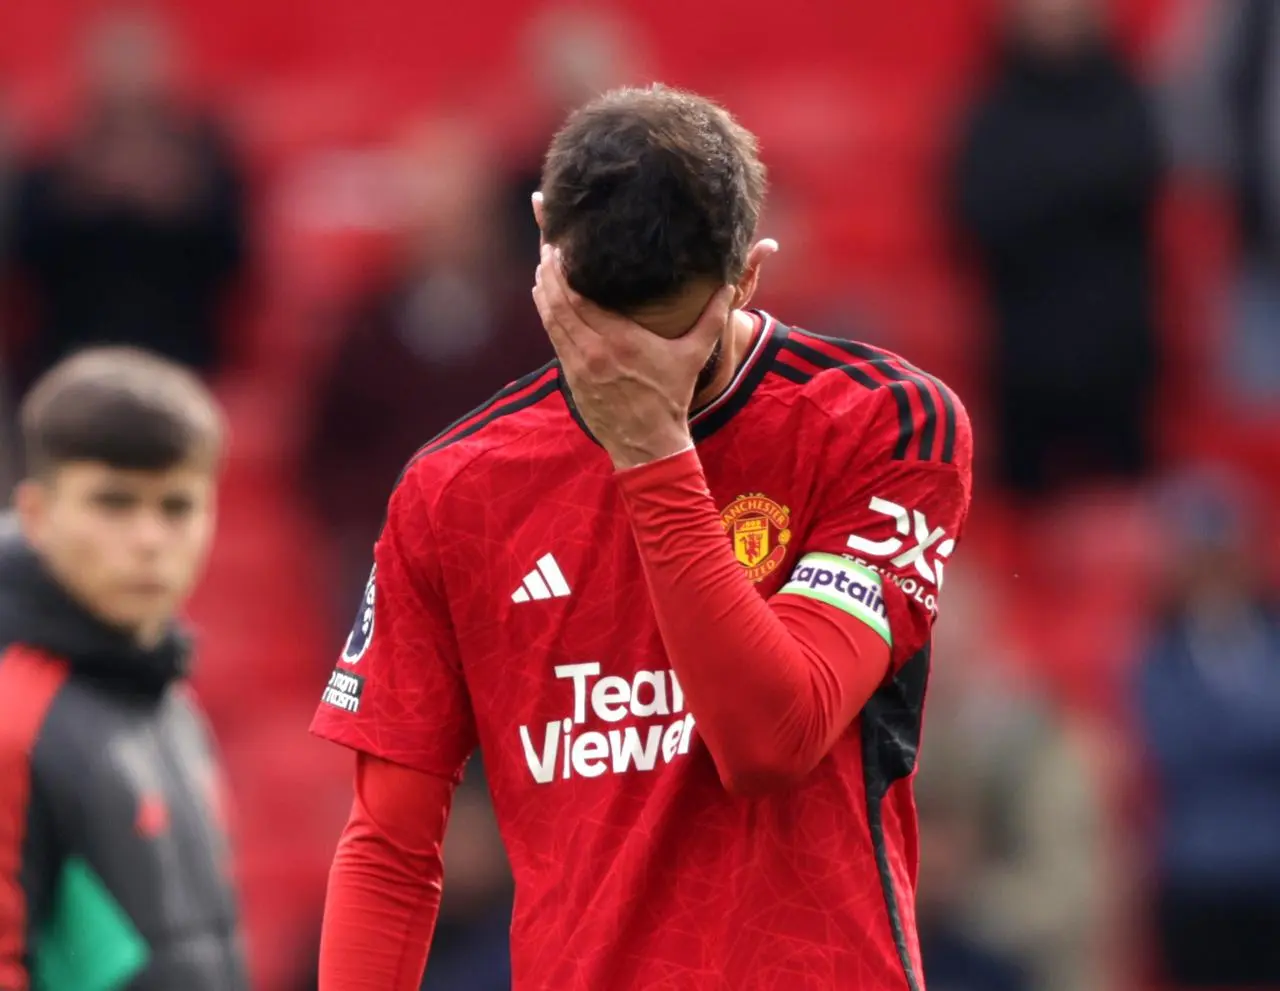 Manchester United’s failure to hold on to victory frustrates Christian Eriksen